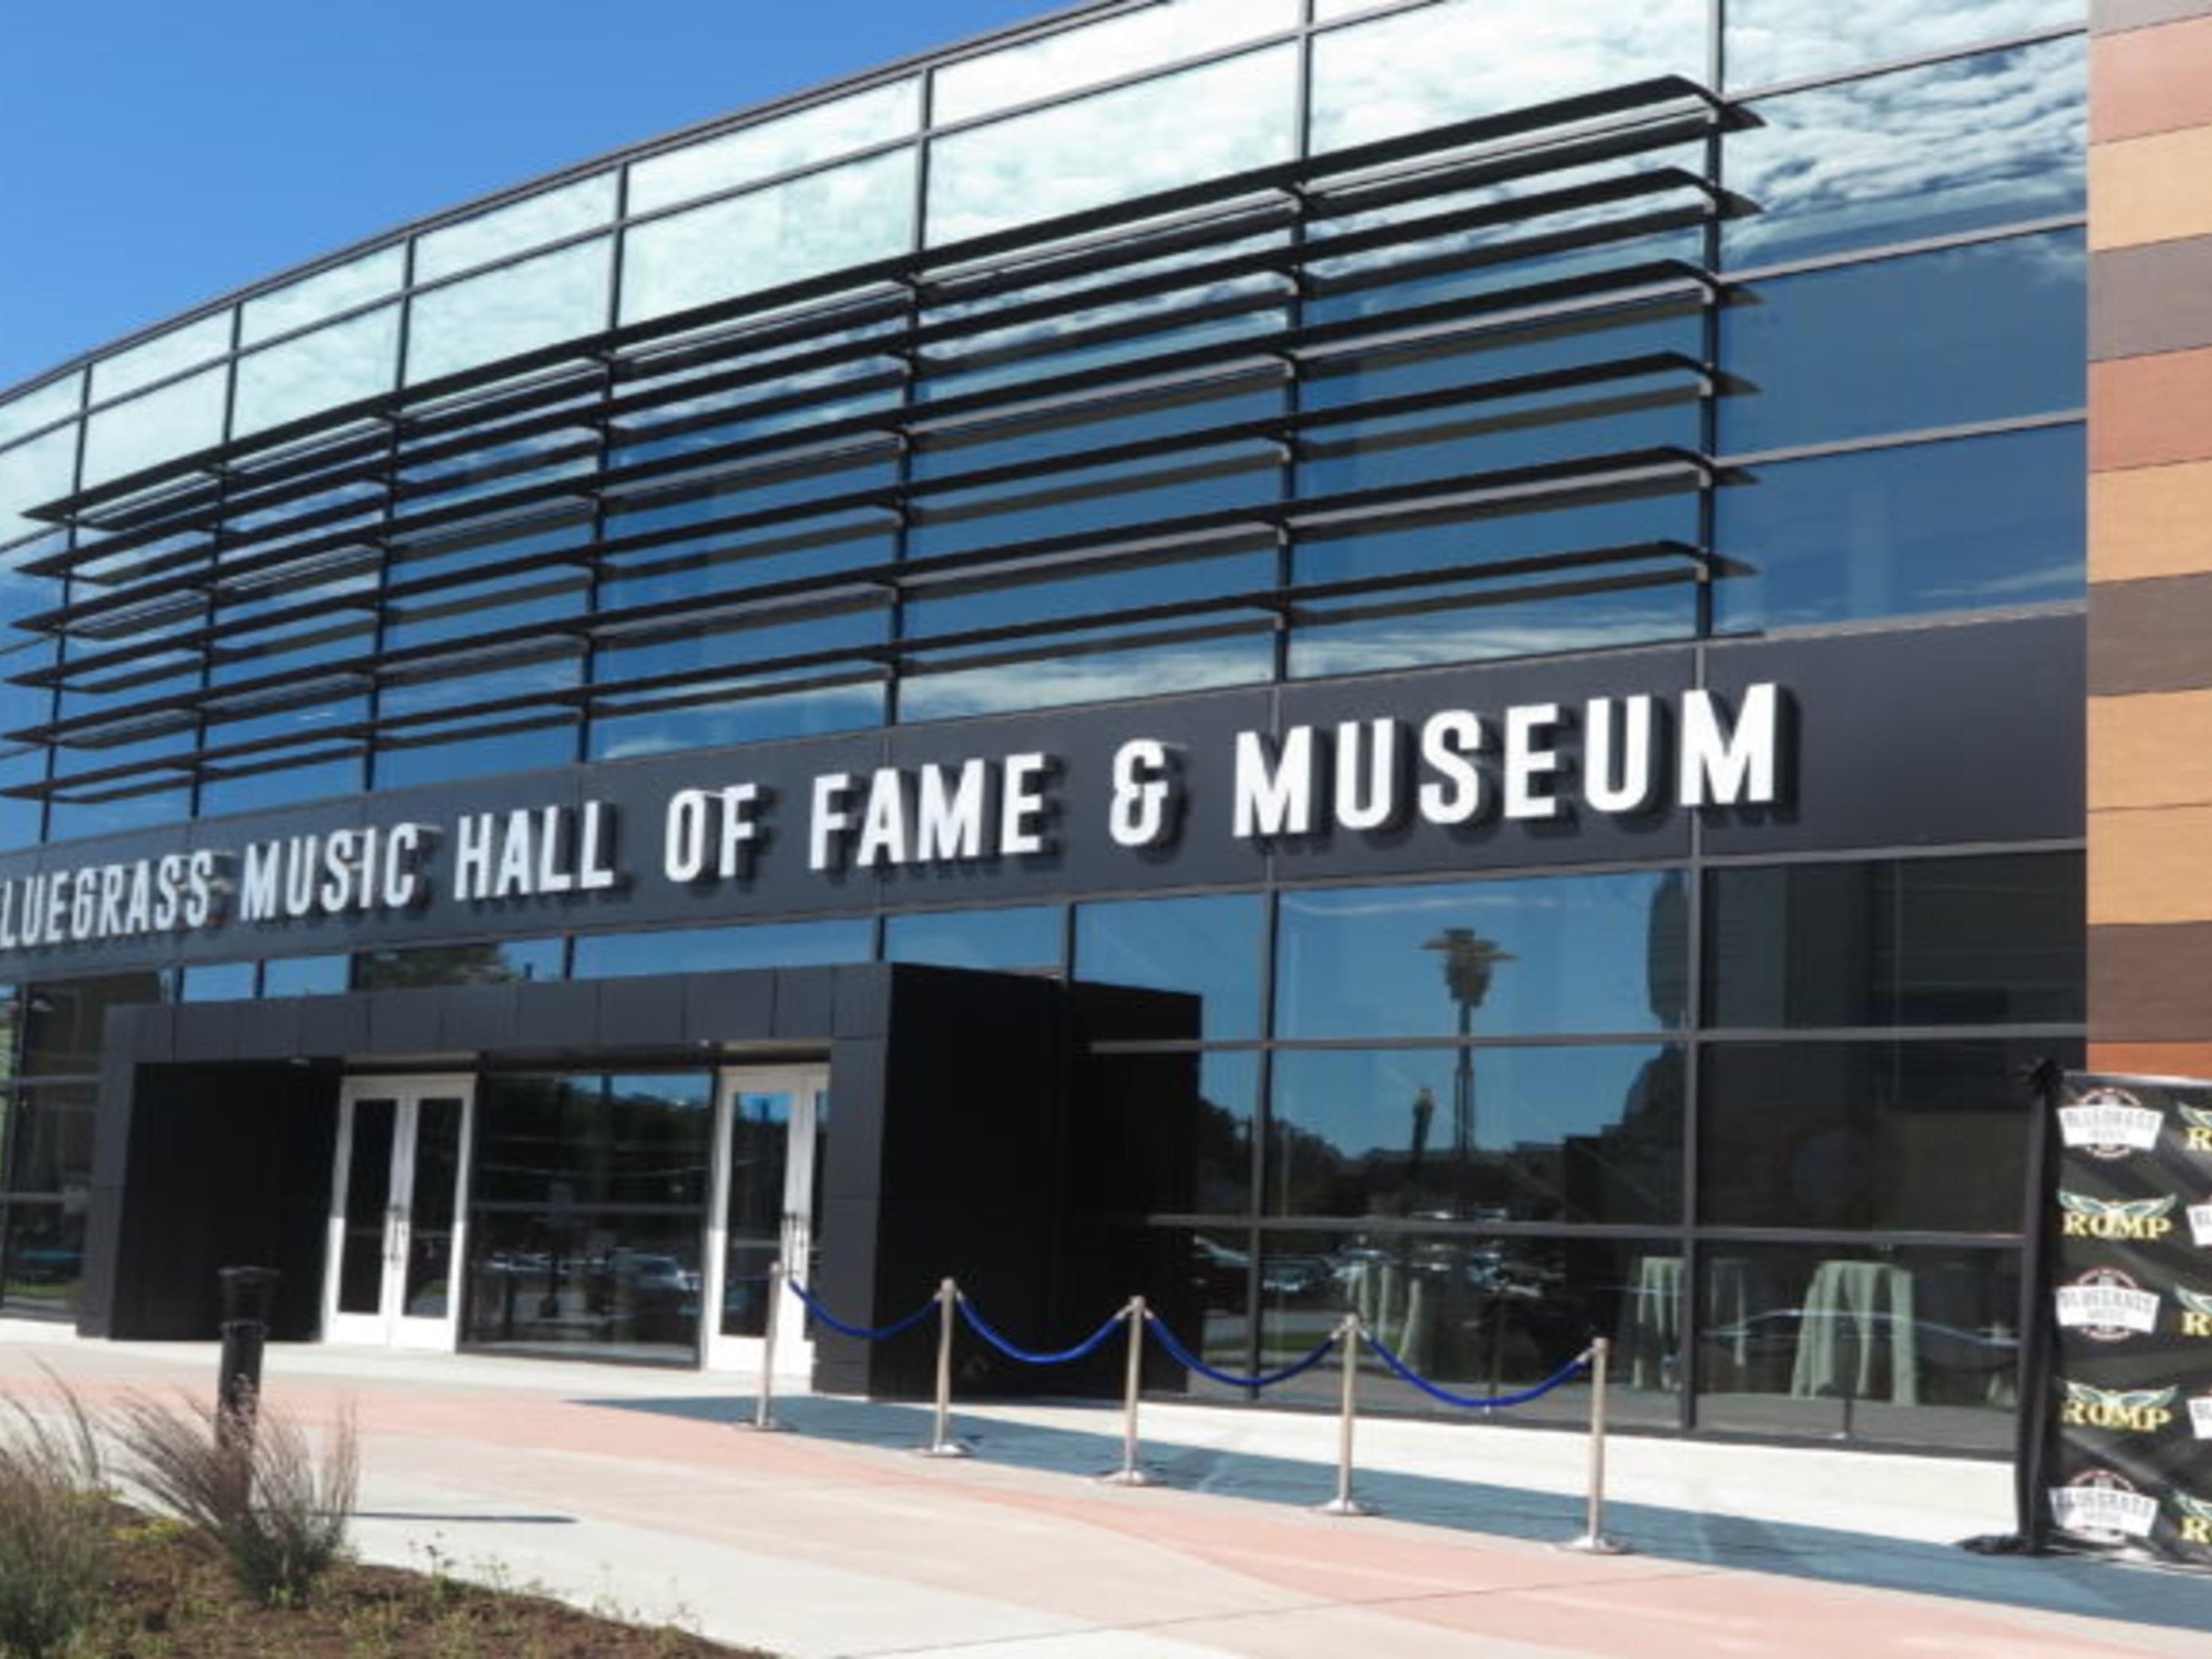 We are centrally located to the International Bluegrass Museum, Owensboro Museum of Science & History, and Owensboro Museum of Fine Art. (several of these attractions are within walking distance)